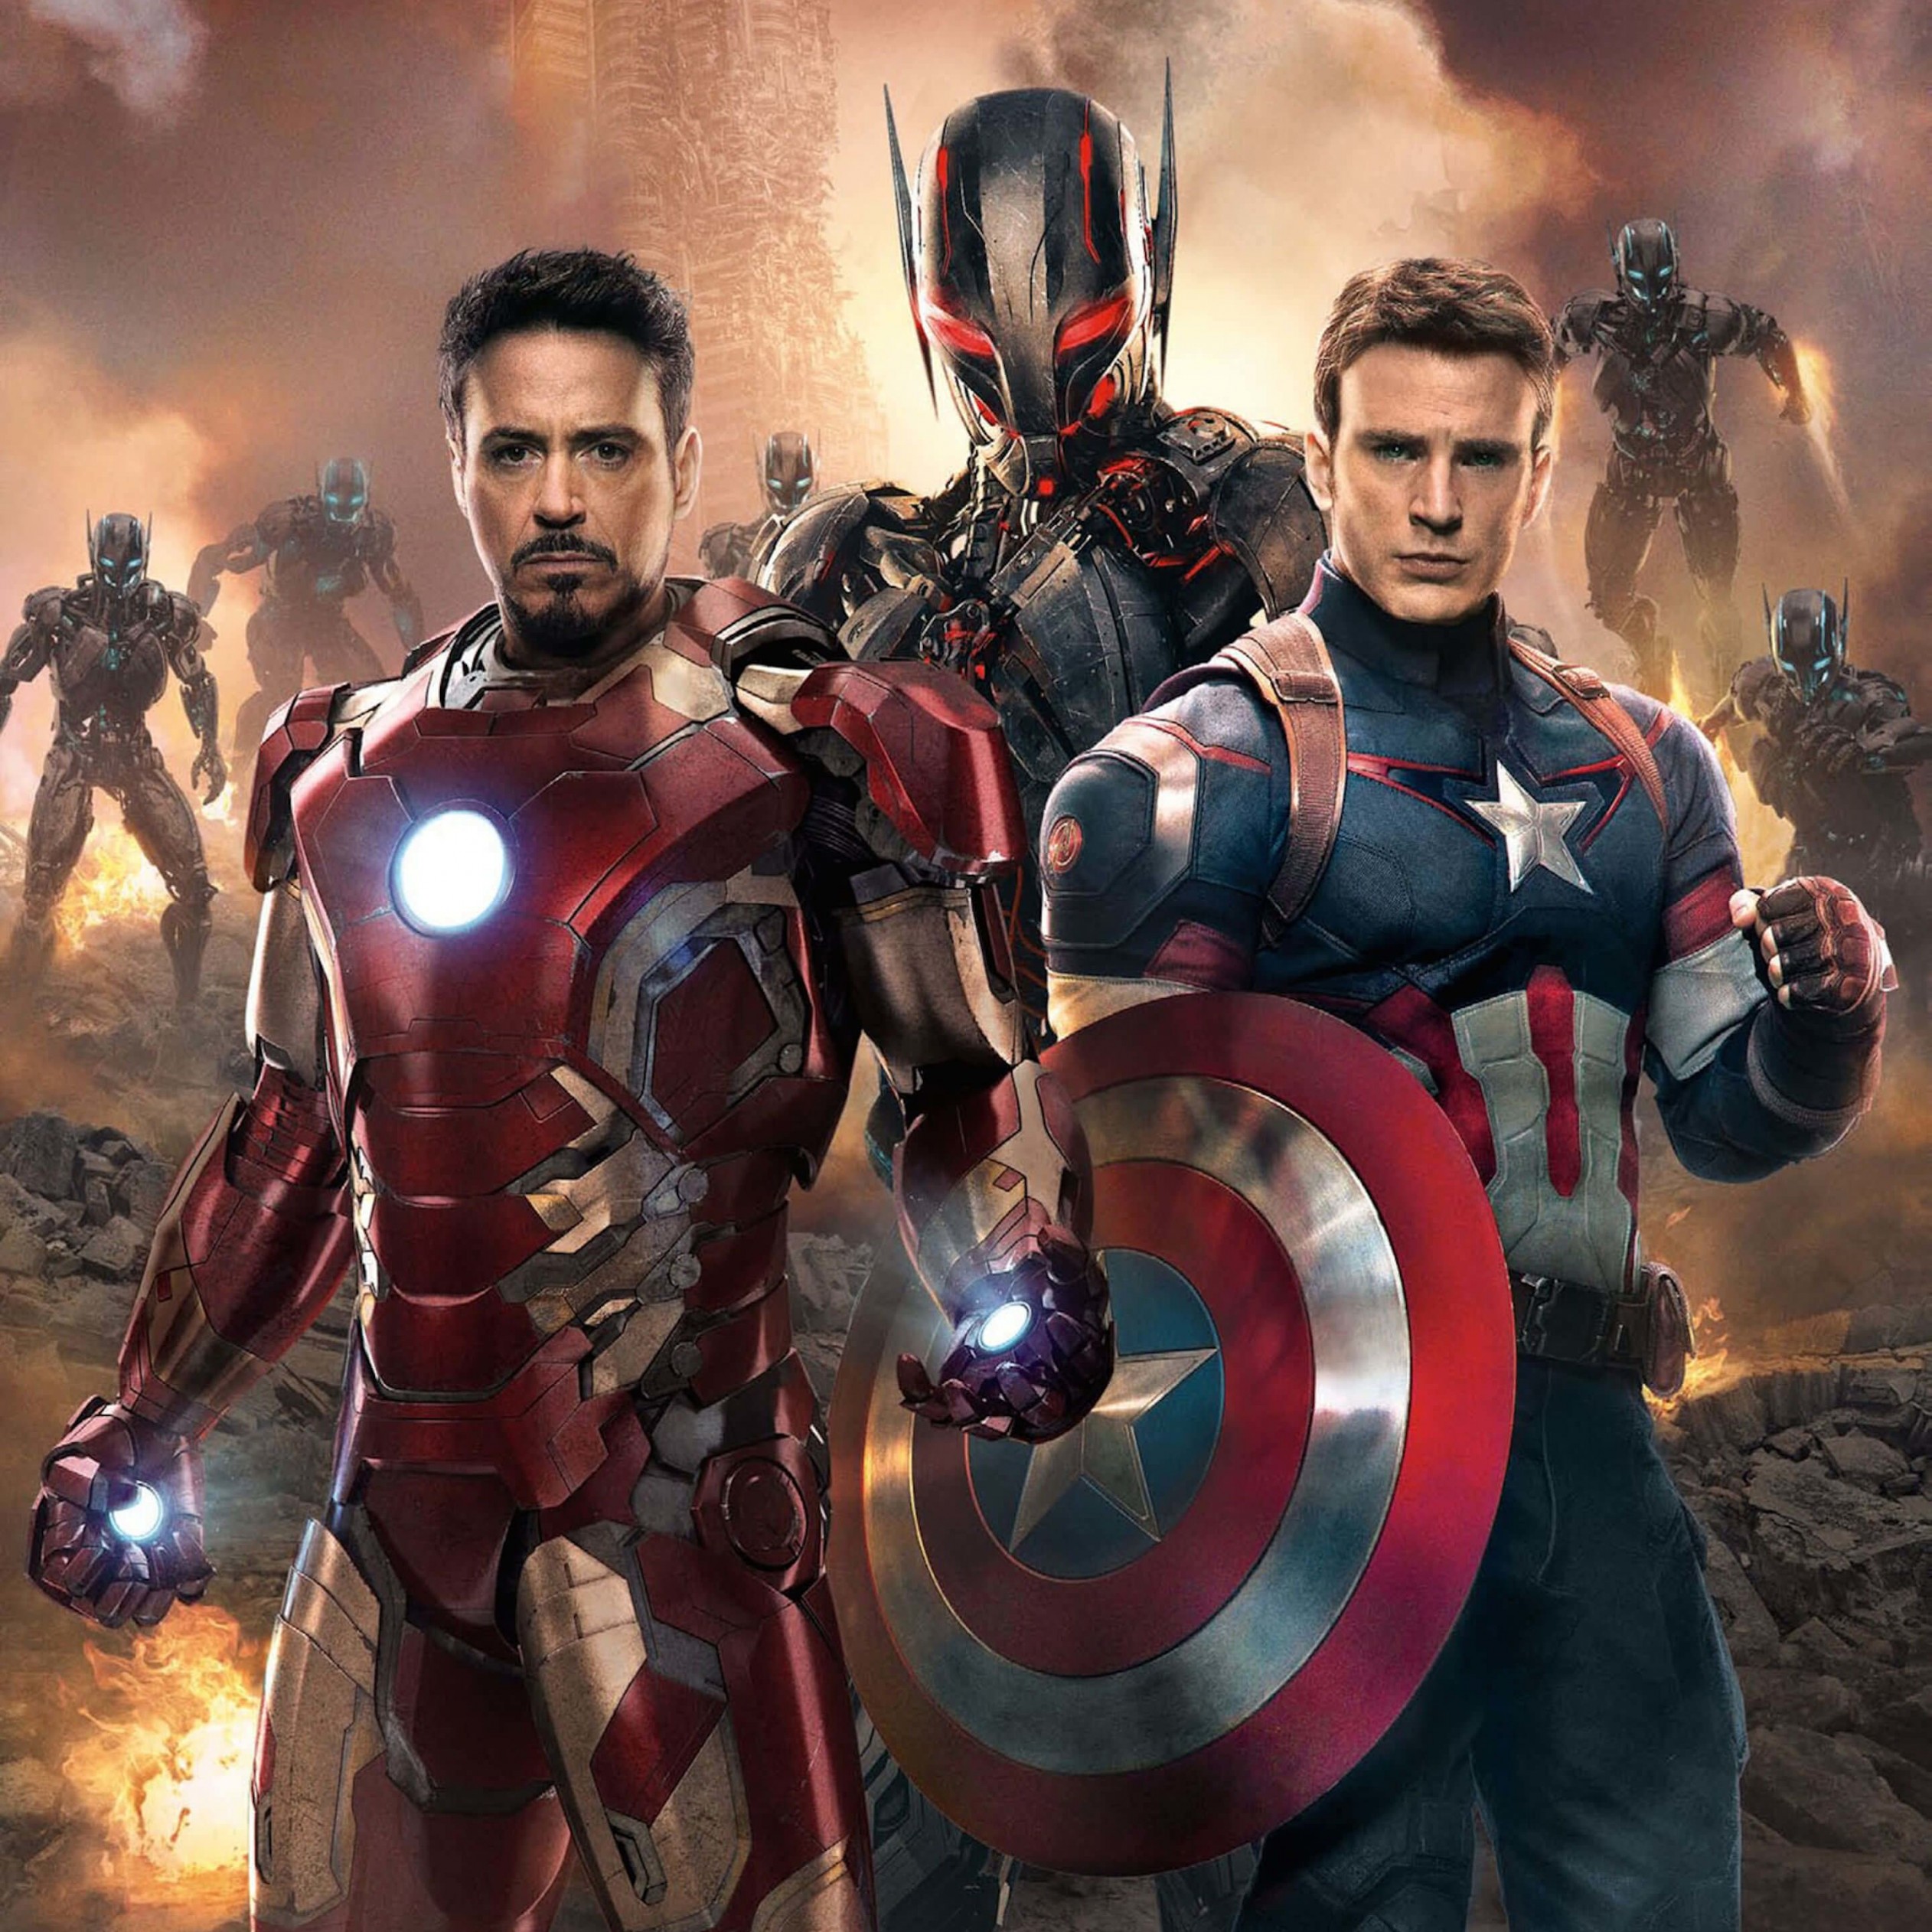 The Avengers: Age of Ultron - Iron Man and Captain America Wallpaper for Apple iPad mini 2